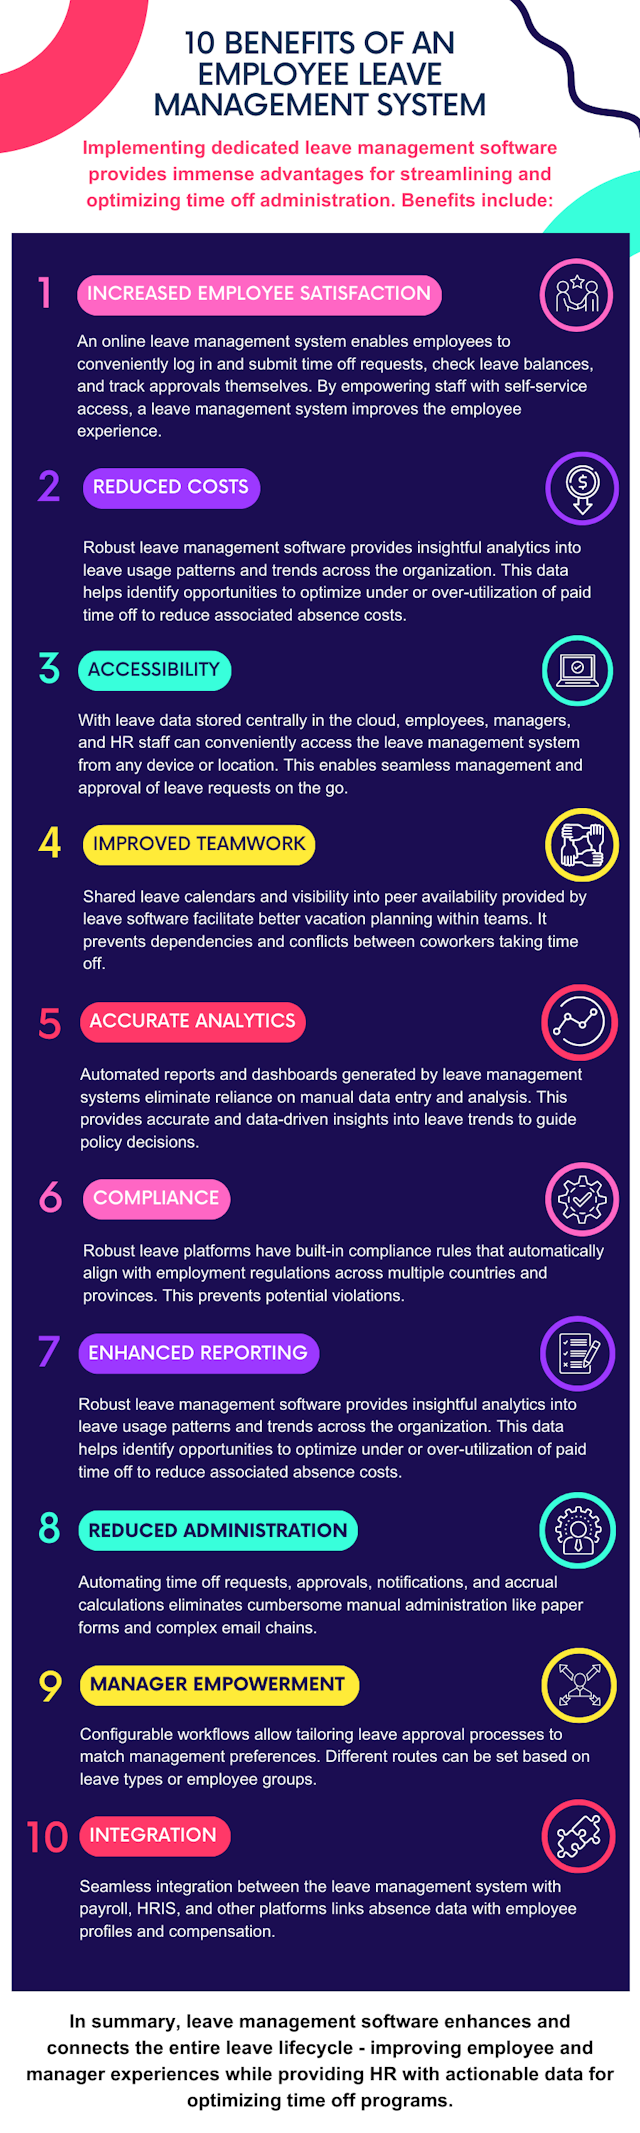 Infographic on 10 Benefits of an Employee Leave Management System